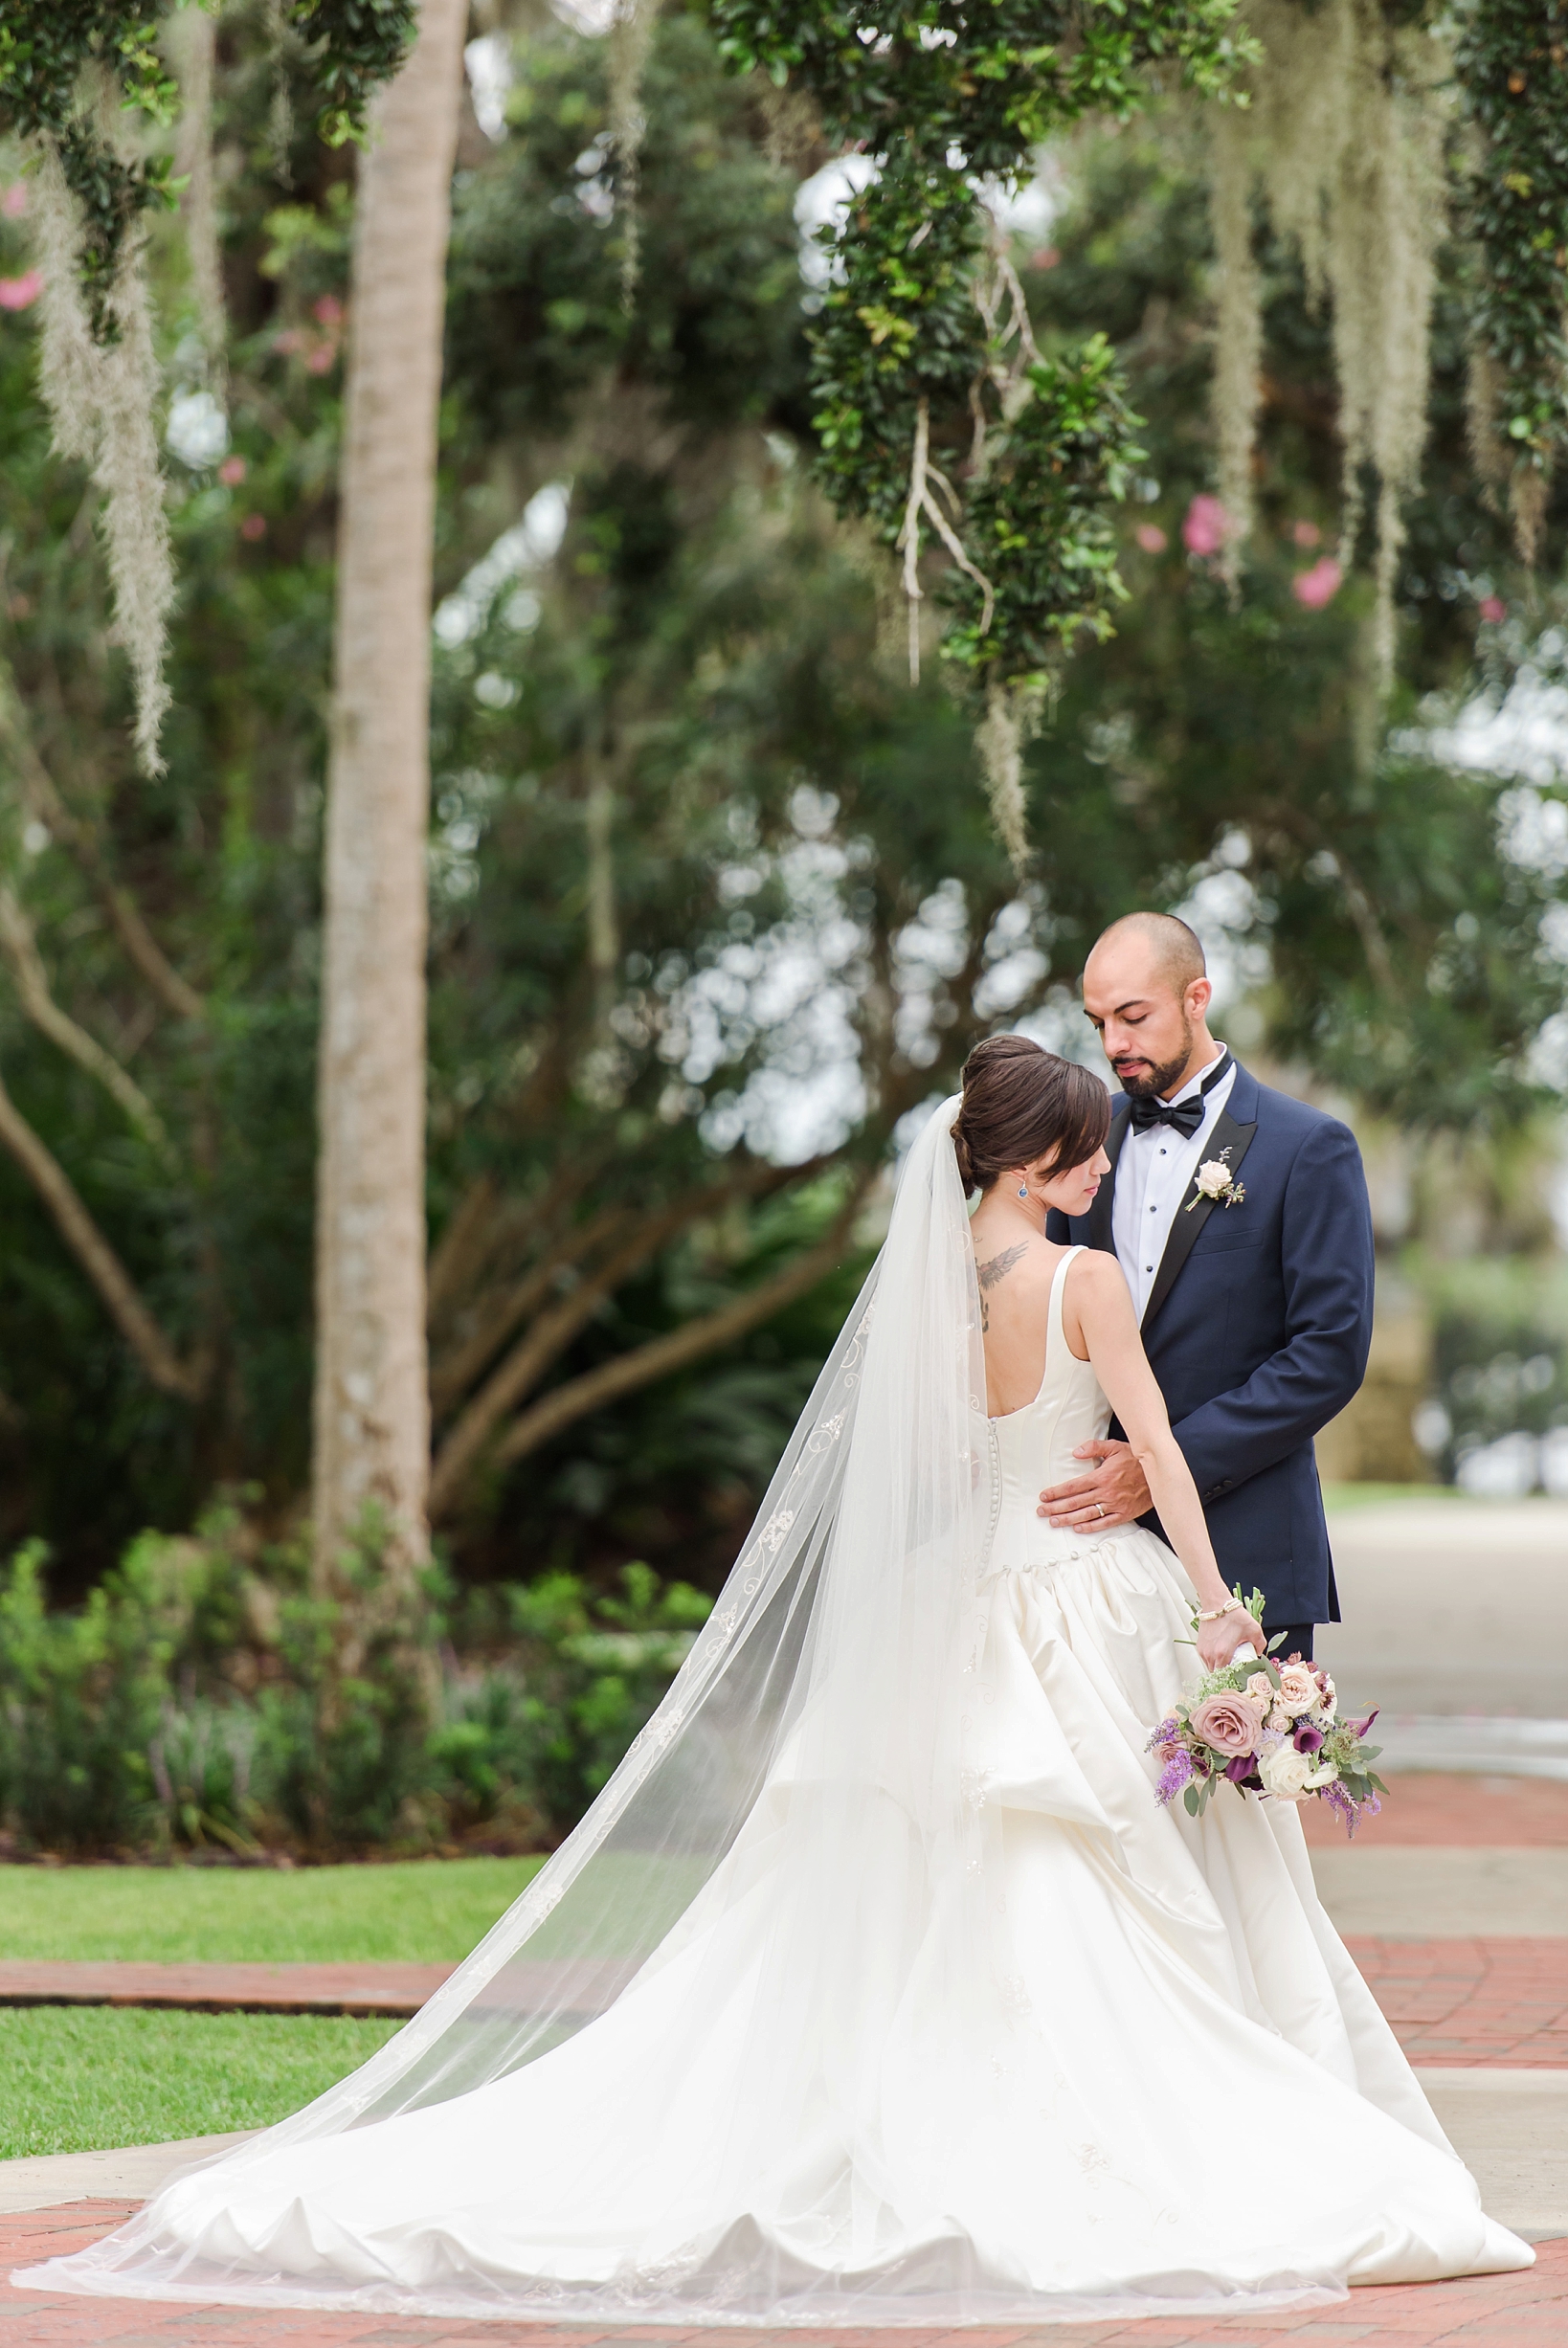 Bride and Groom in a dramatic pose in Port Orange, Fl by Sarah & Ben Photography